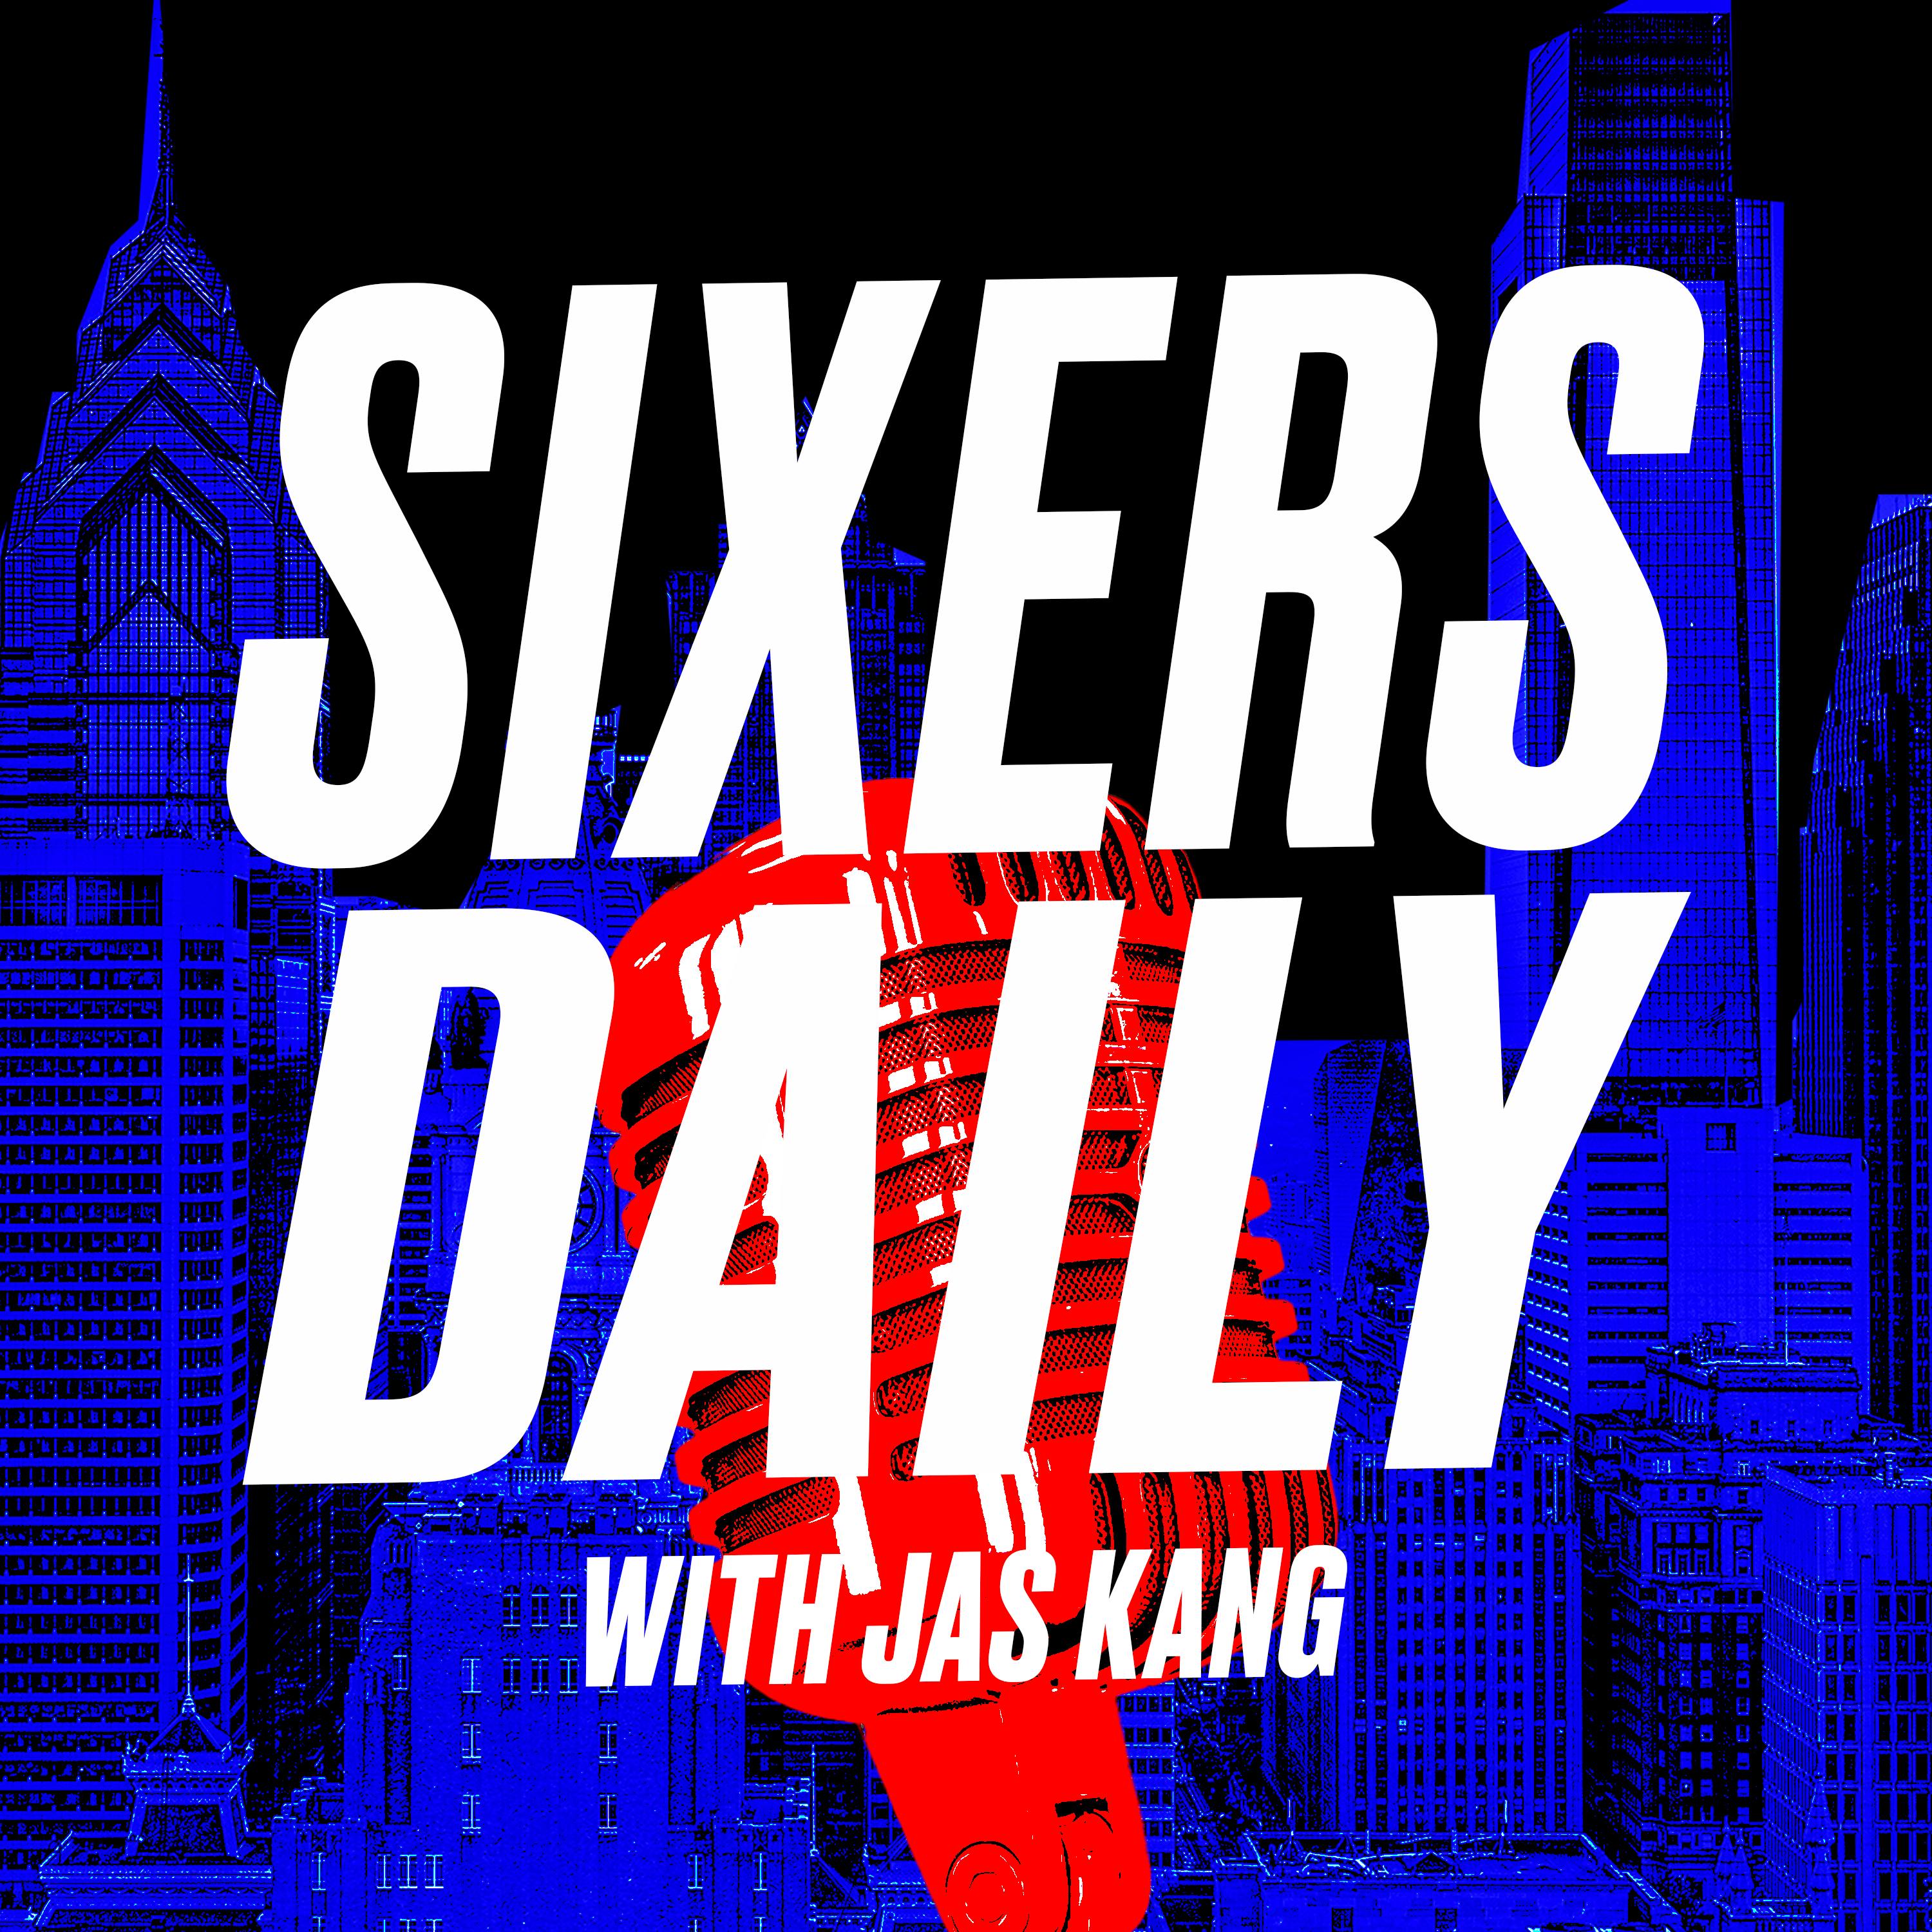 Sixers Daily with Jas Kang - Will James Harden bounce back? Tyrese Maxey's value, Lakers hire Darvin Ham plus NBA Finals talk with Trevor Lane of Lakers Nation